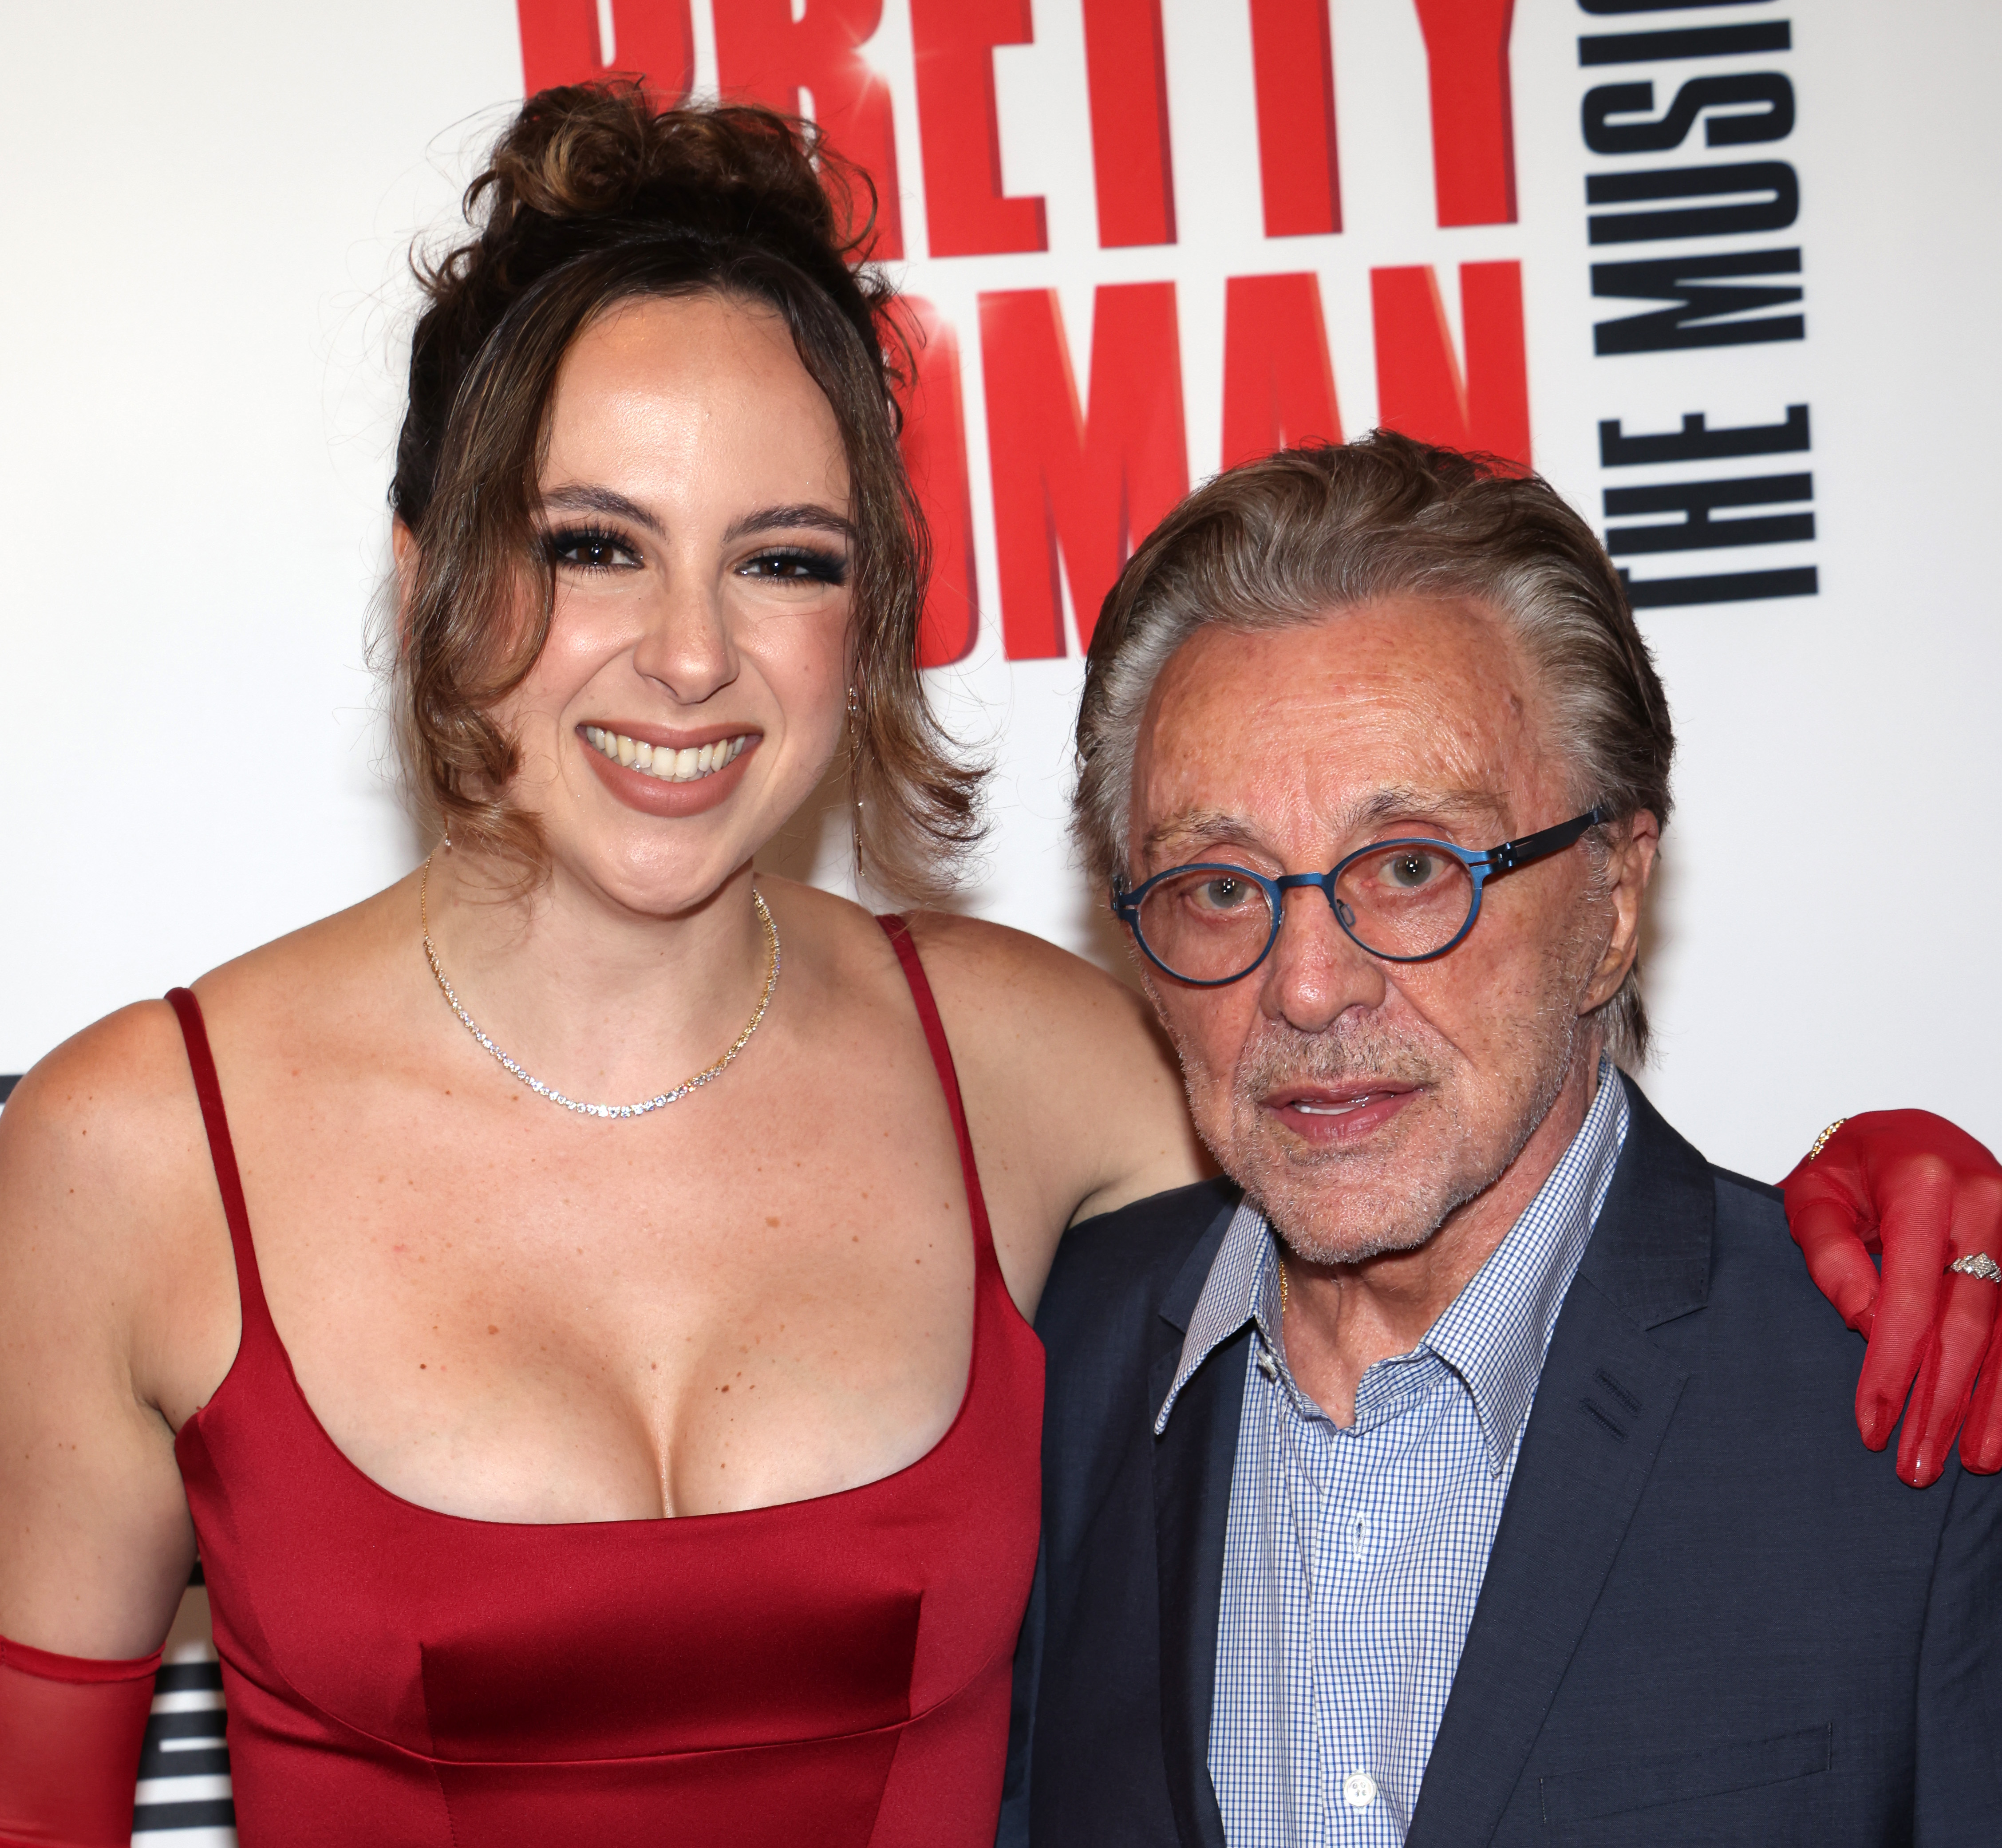 Olivia Valli and her grandfather Frankie Valli at the Los Angeles opening night for "Pretty Woman The Musical" on June 17, 2022, in Hollywood, California | Source: Getty Images